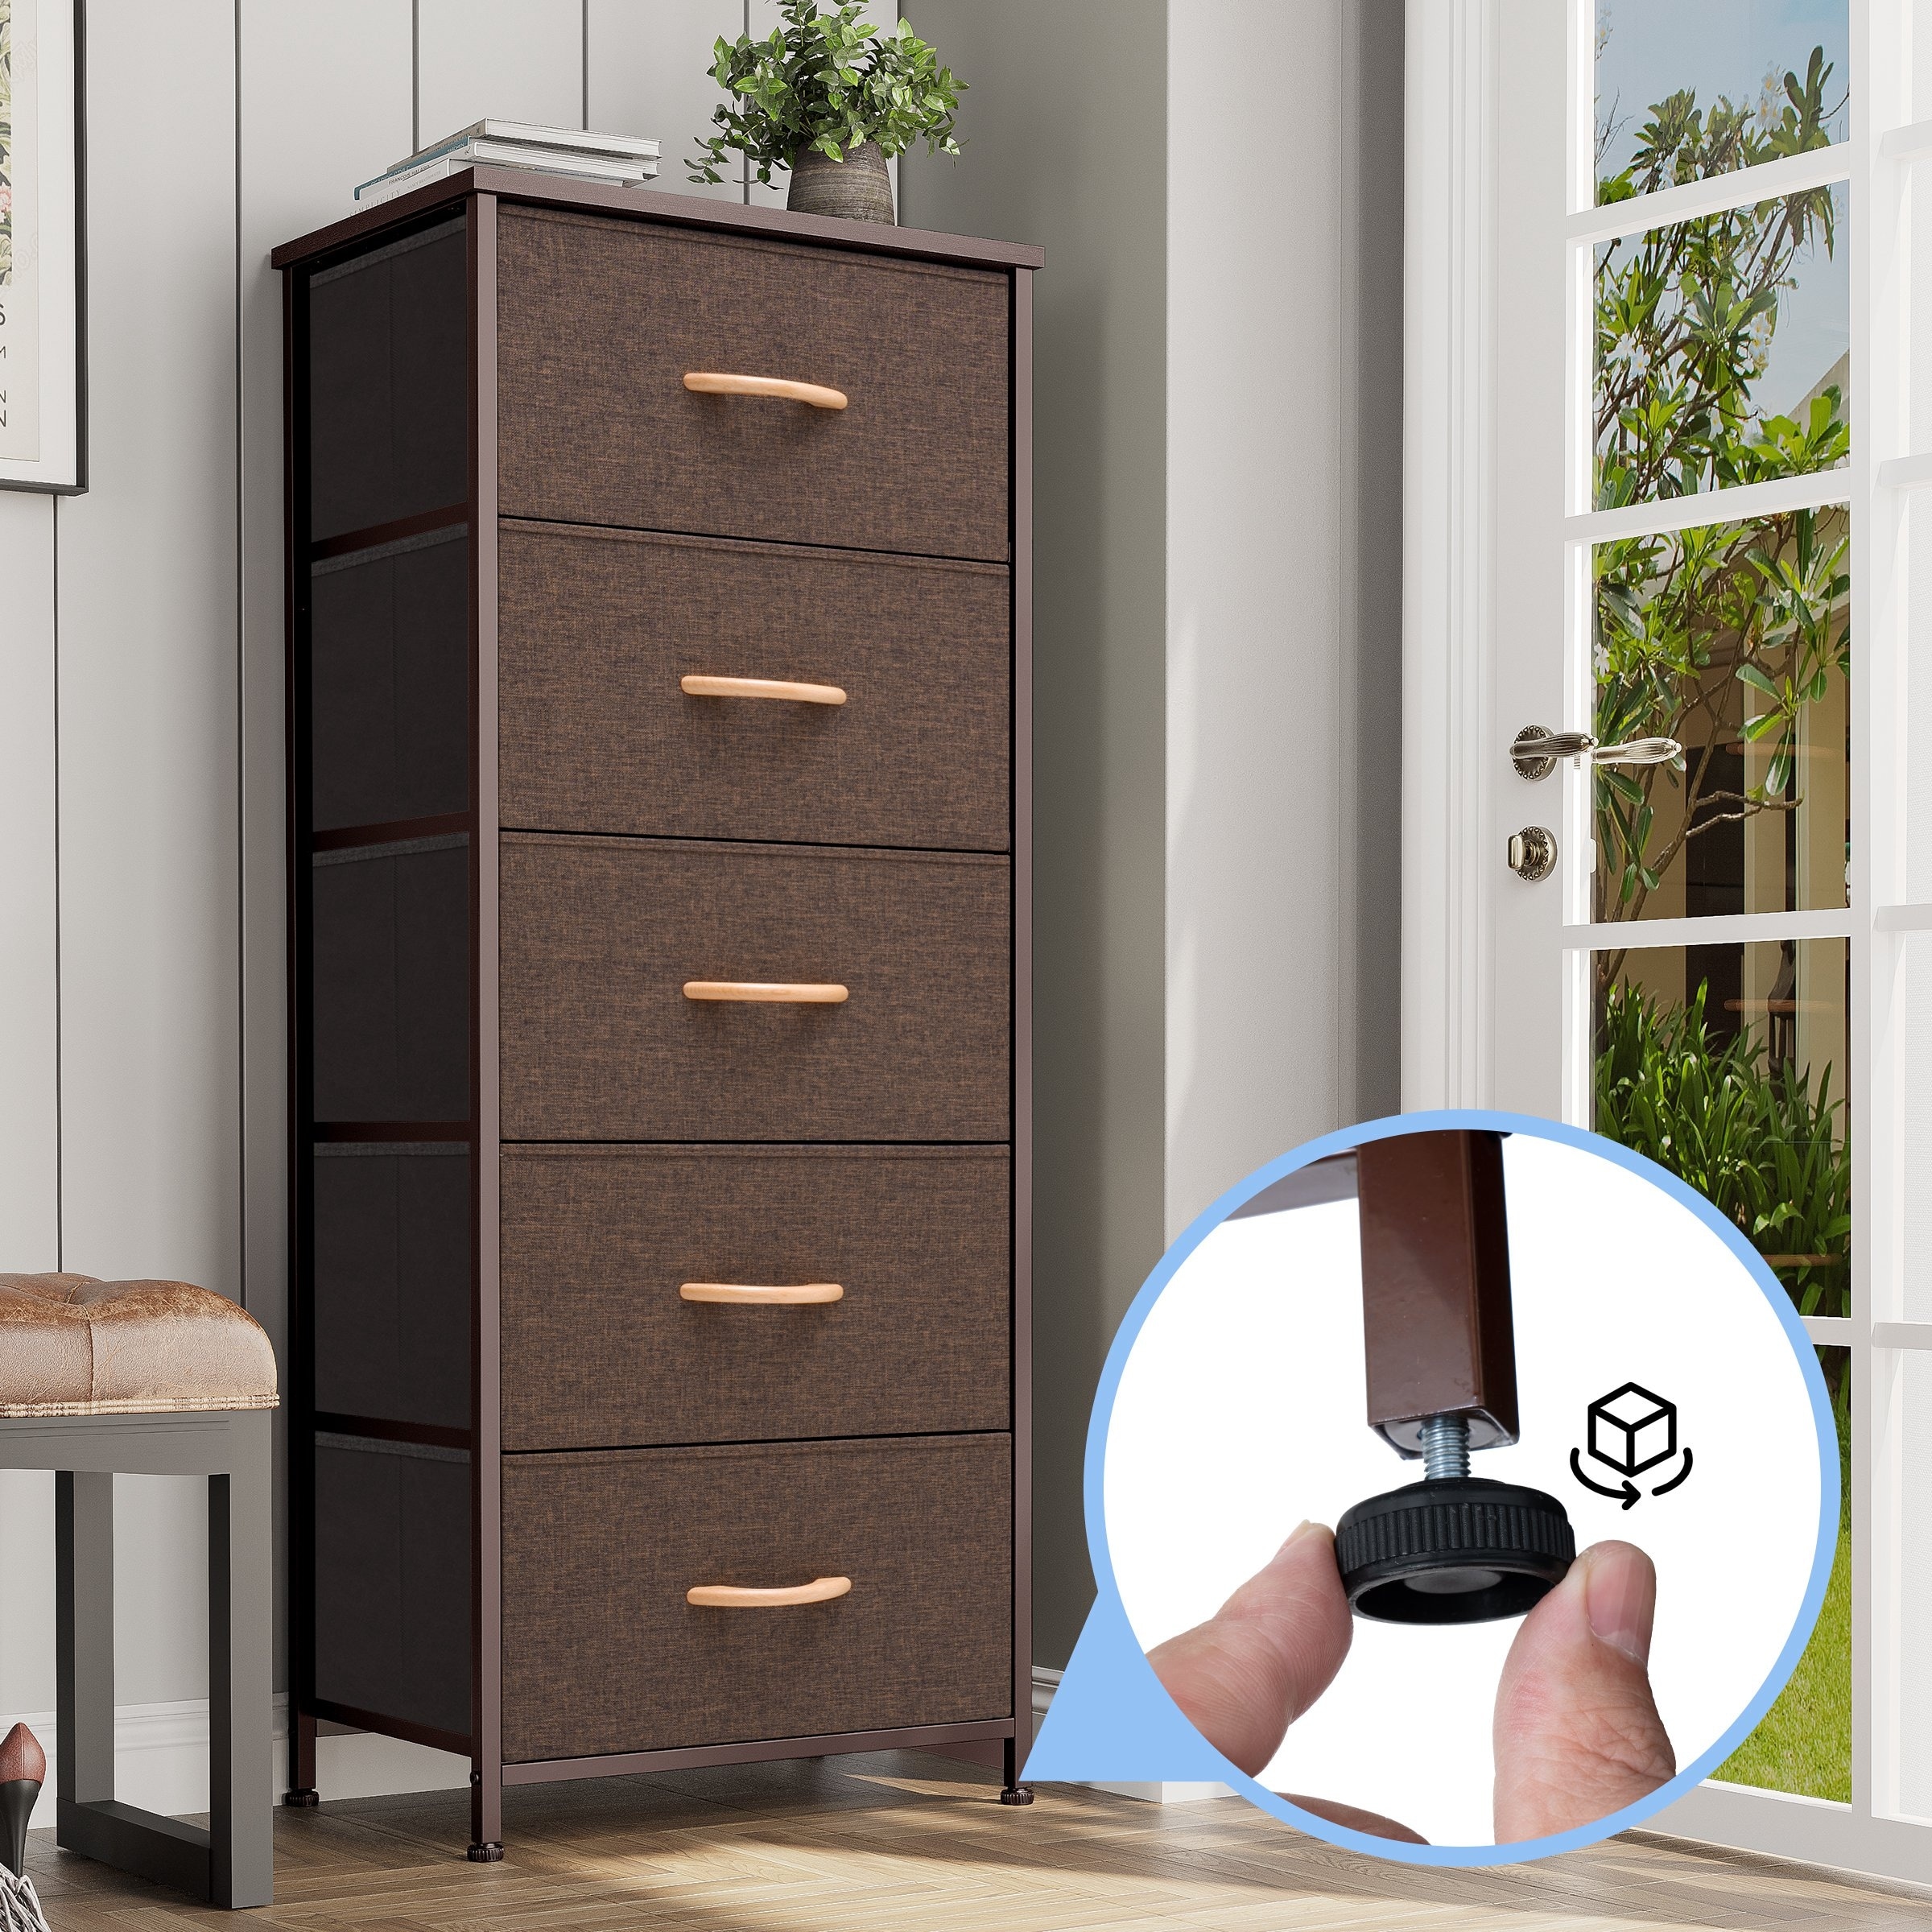 https://ak1.ostkcdn.com/images/products/is/images/direct/64c09345ffe02ecb58b6285c26c98006ff69d919/Contemporary-5-drawer-Chest-Vertical-Storage-Tower--Fabric-Dresser.jpg